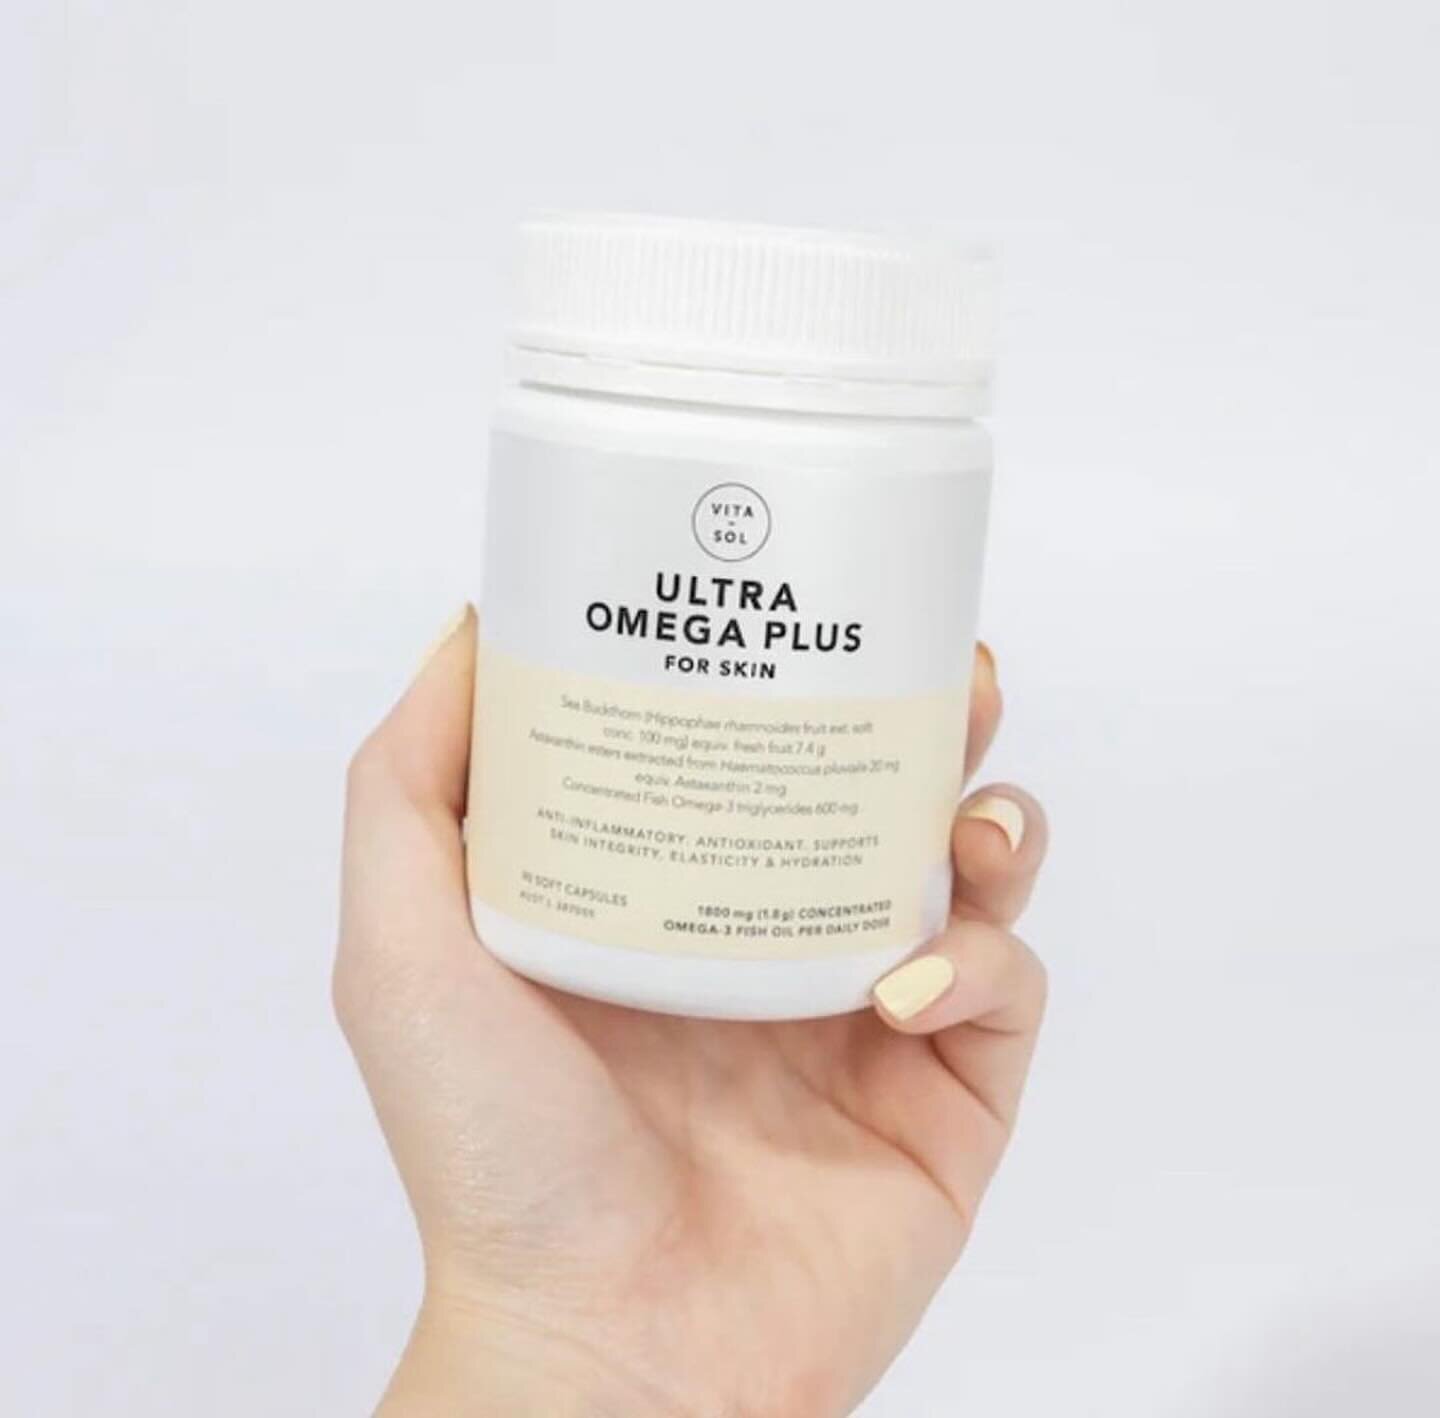 Something new is coming and we can&rsquo;t wait! Available to pre order now 

@vitasolskin Ultra Omega Plus is not just a regular fish oil supplement. Our unique omegas have been expertly formulated with skin health in mind, combining Seabuckthorn nu